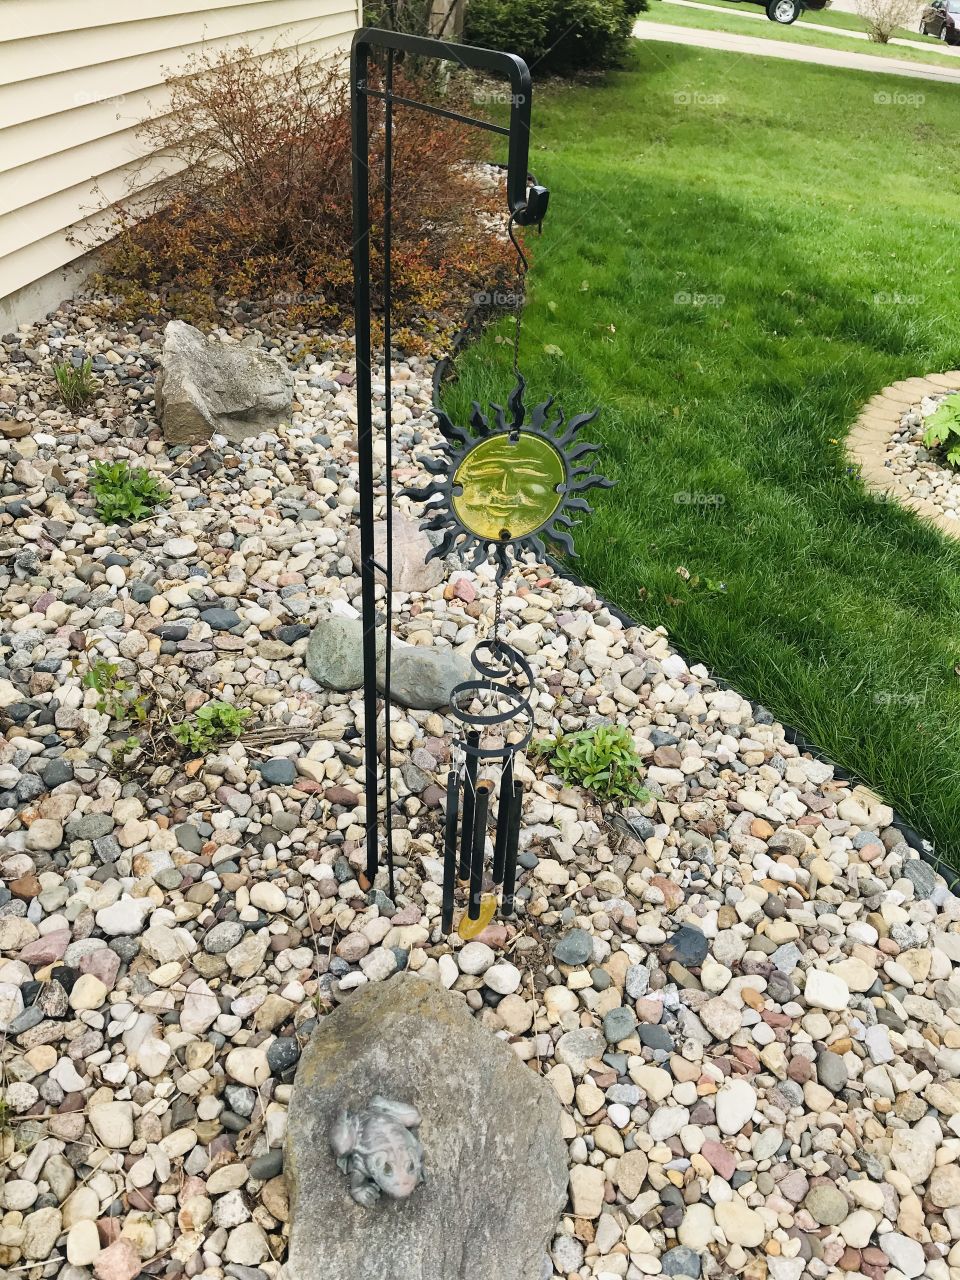 Gorgeous sun wind chime garden decor sitting against rock filled area background. 